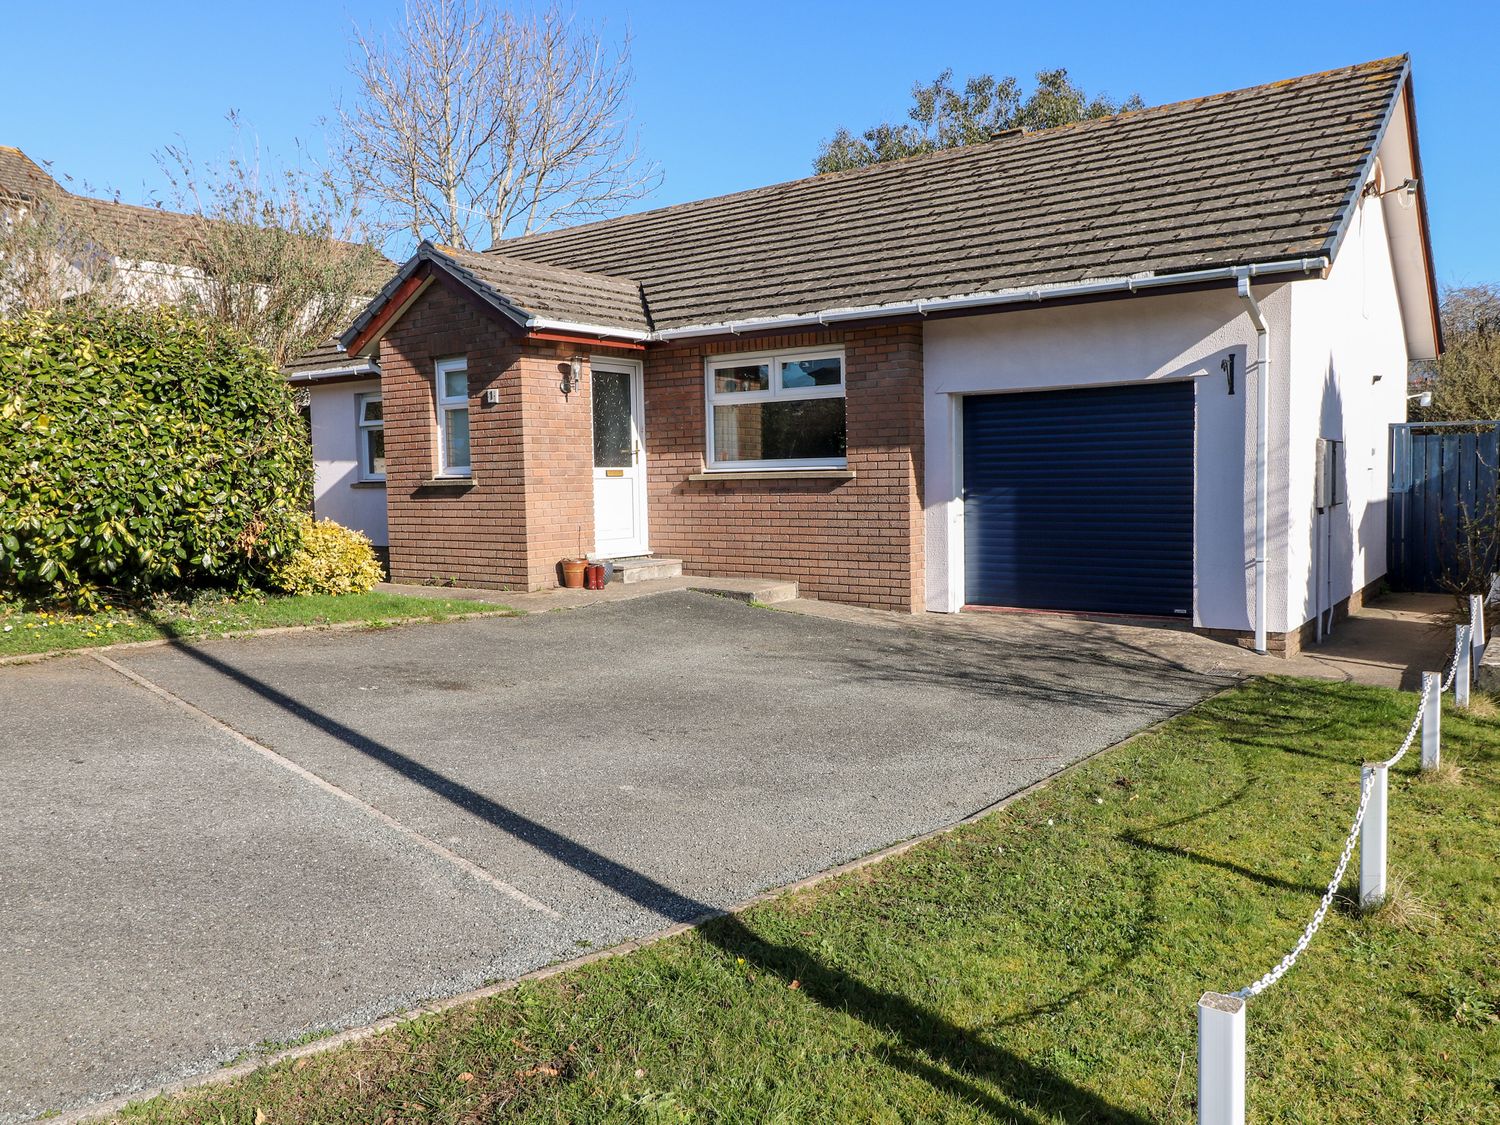 1 Gloucester Way - South Wales - 1127678 - photo 1